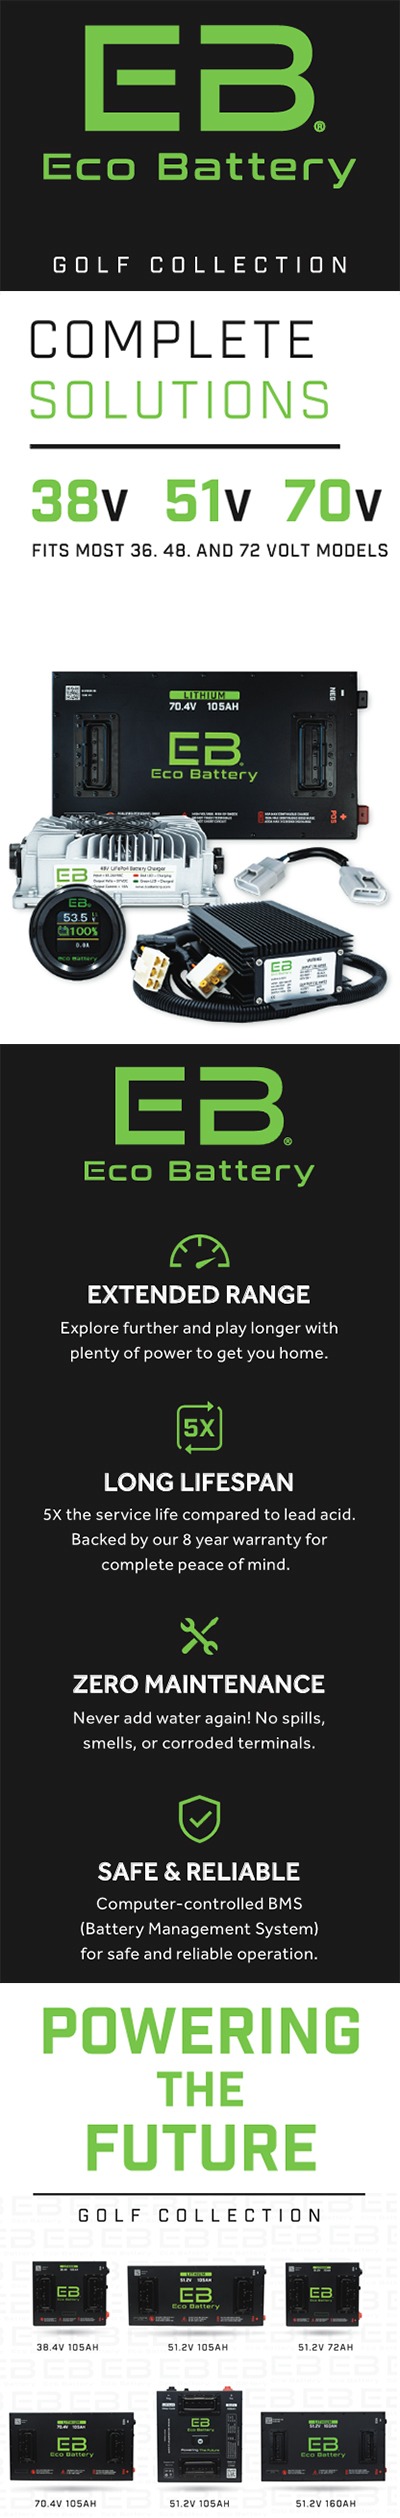 Promotional and feature brochure for EB Eco Battery lithium battery golf cart collection.